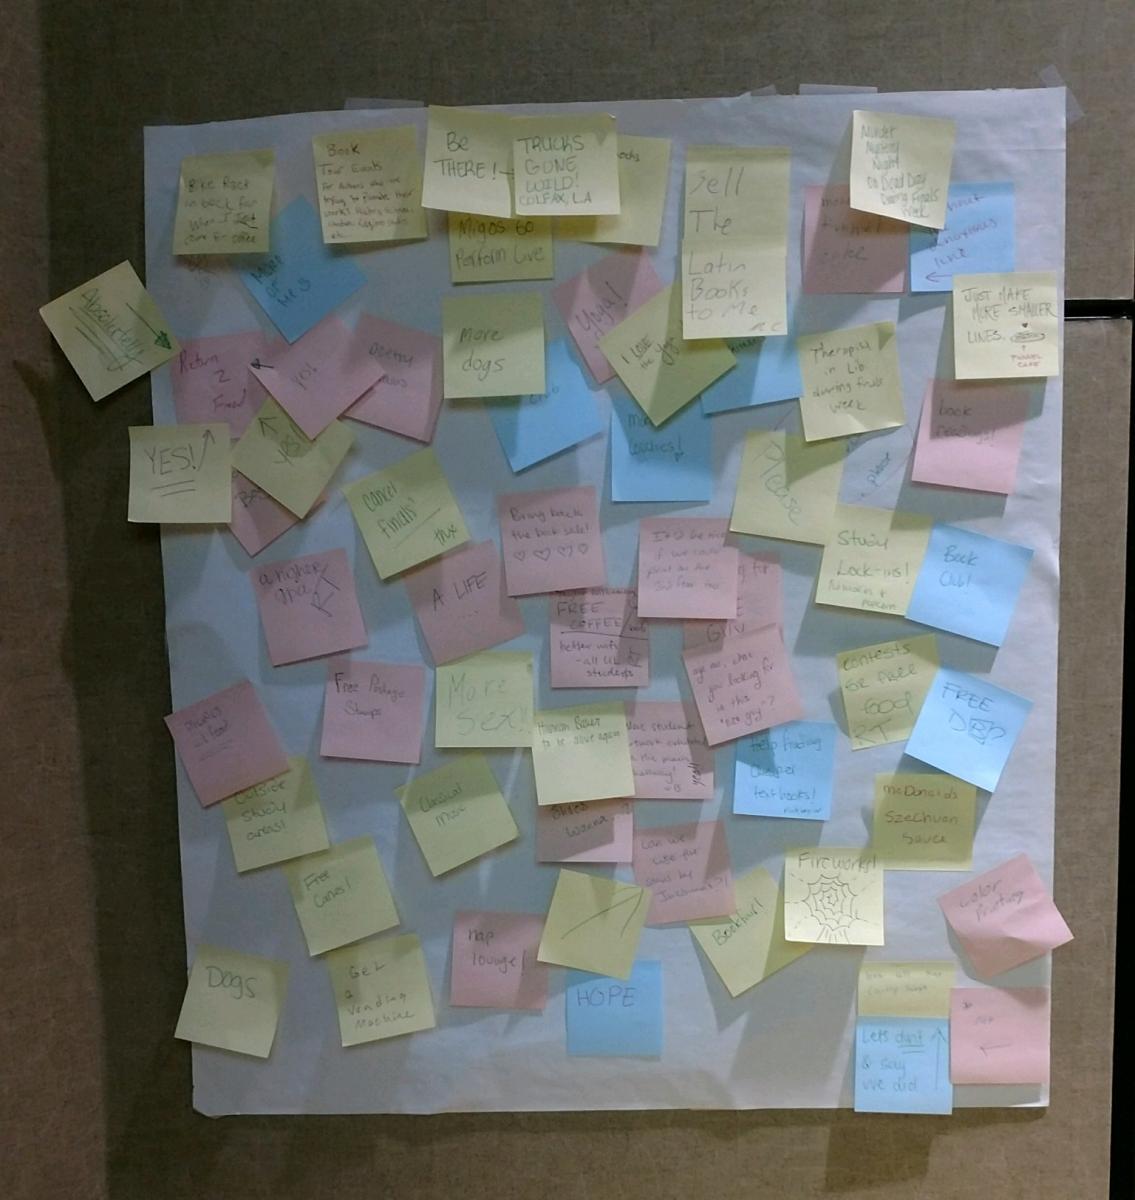 Library Therapy Wall: 2017 Spring - What Events/Services Should Your Library Have?...